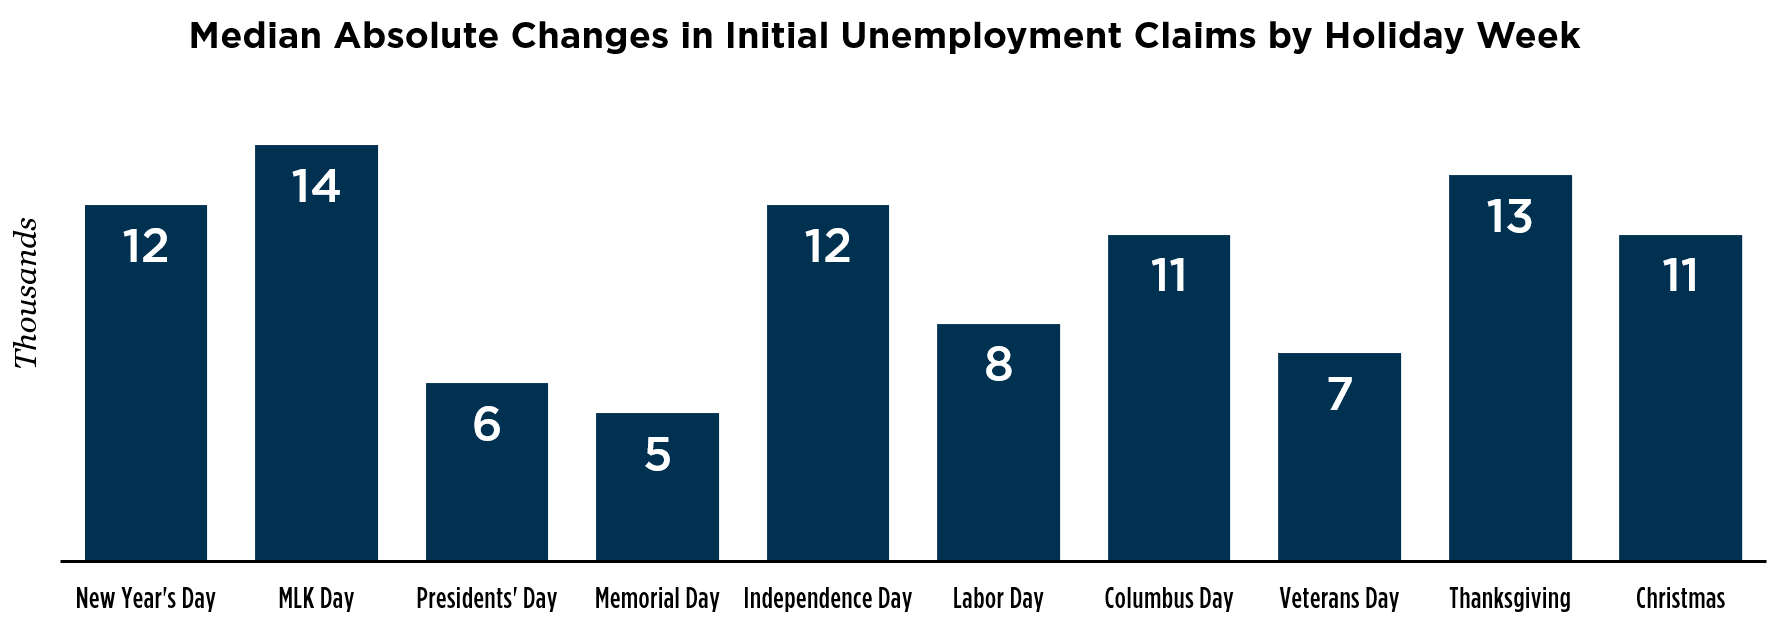 chart depicting the Median Absolute Changes in Initial Unemployment Claims by Holiday Week